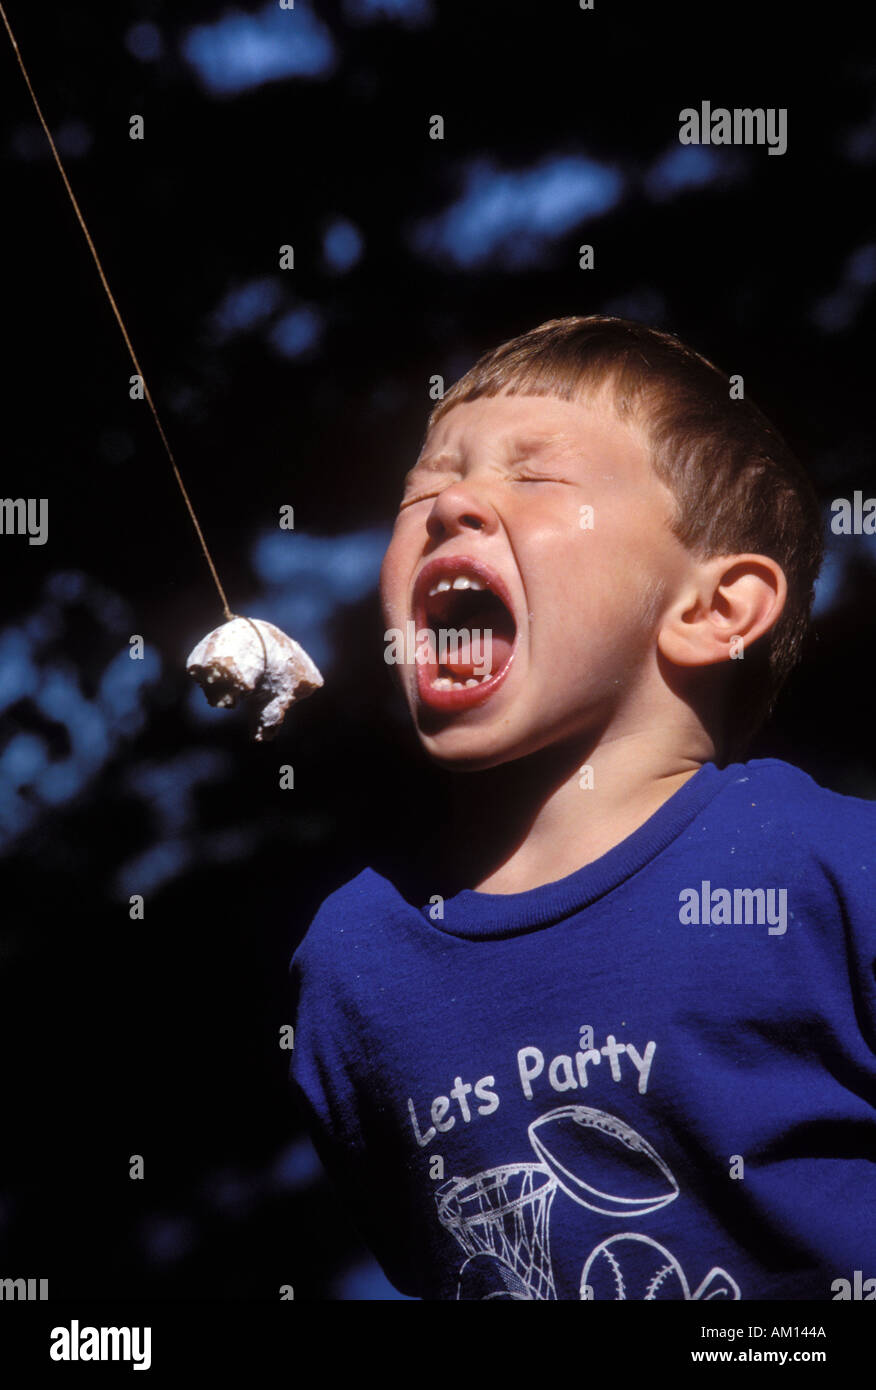 Boy Eating Donut on A String Stock Photo